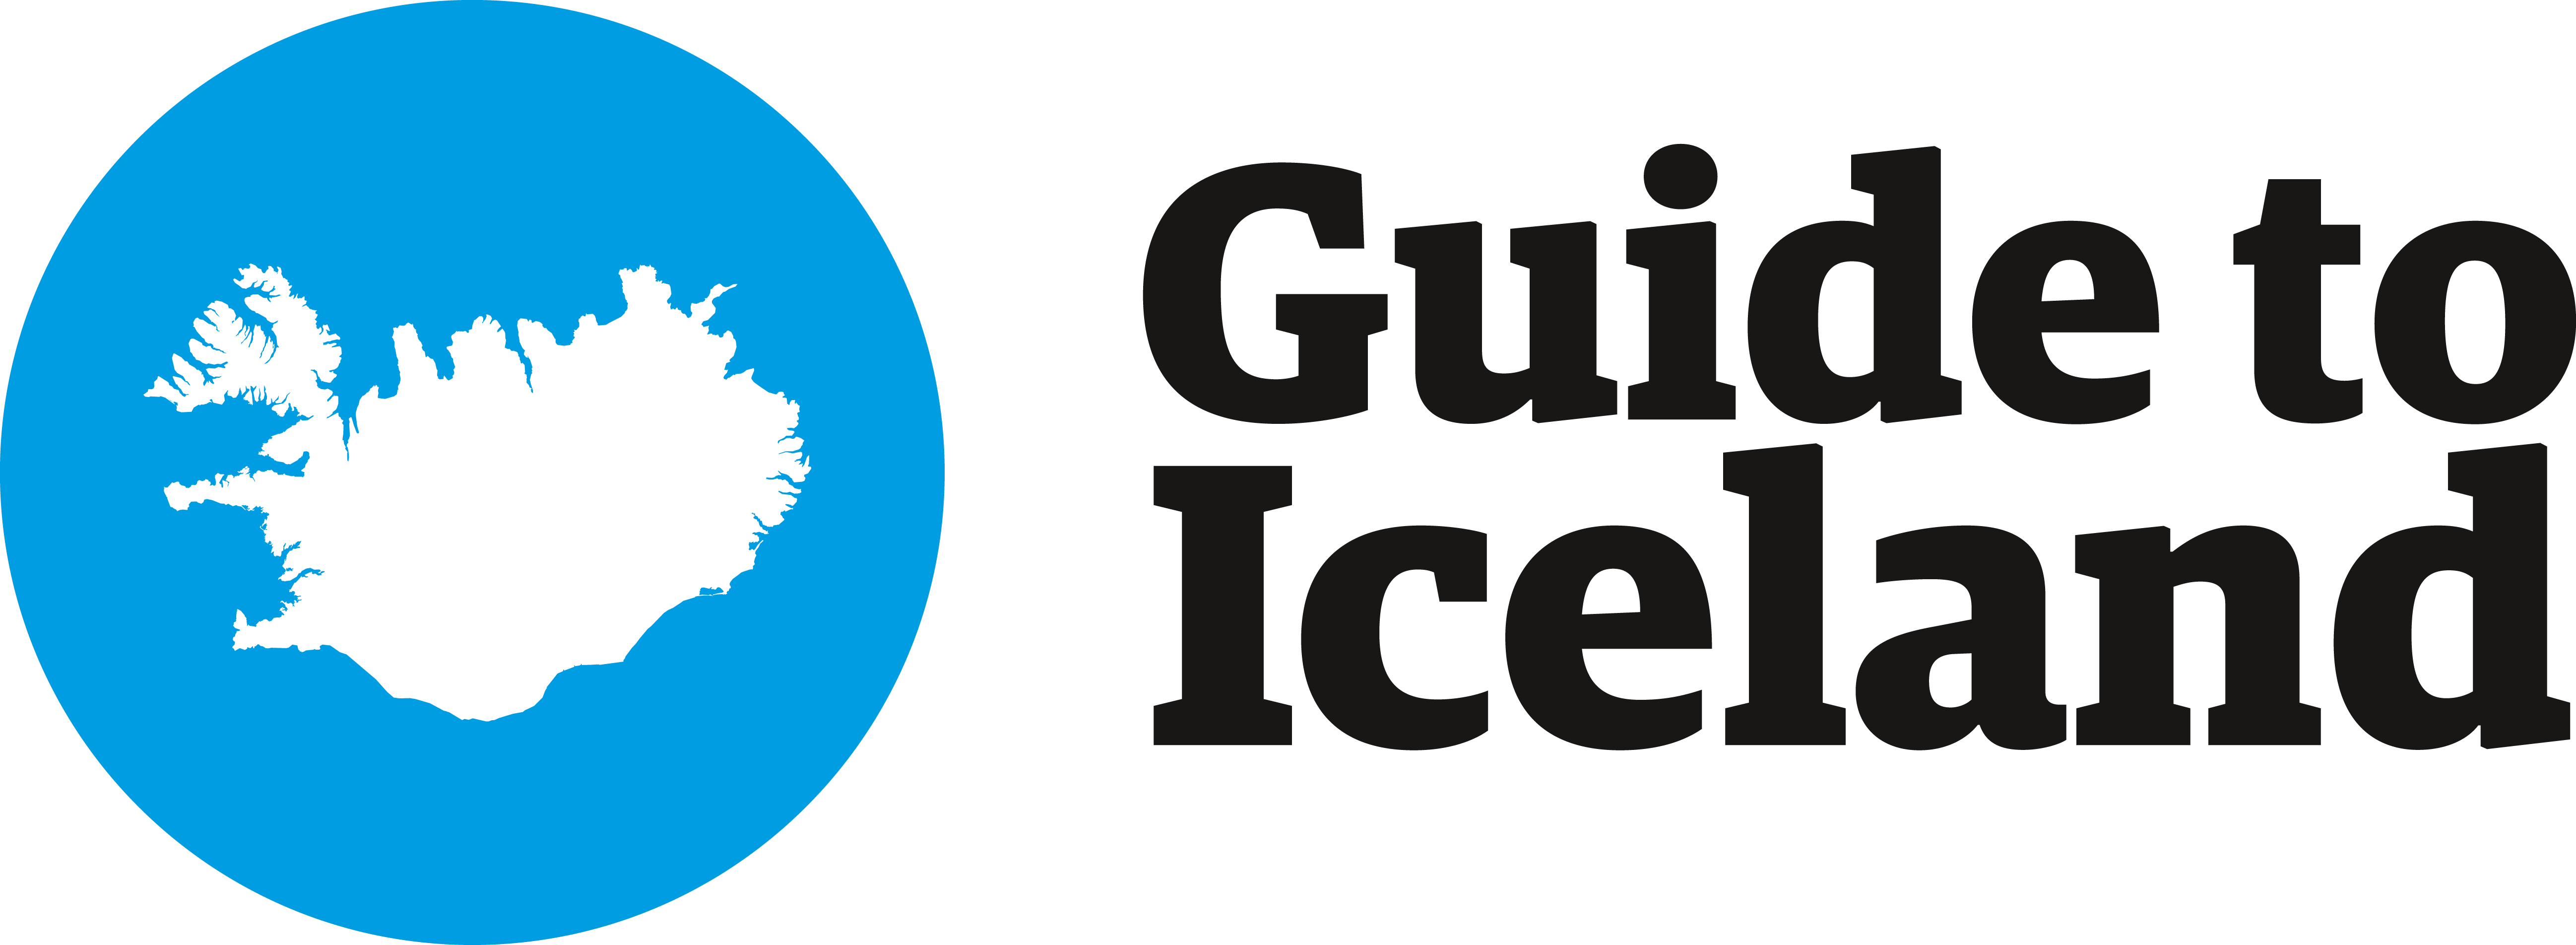 Iceland Logo - Guide to Iceland forum